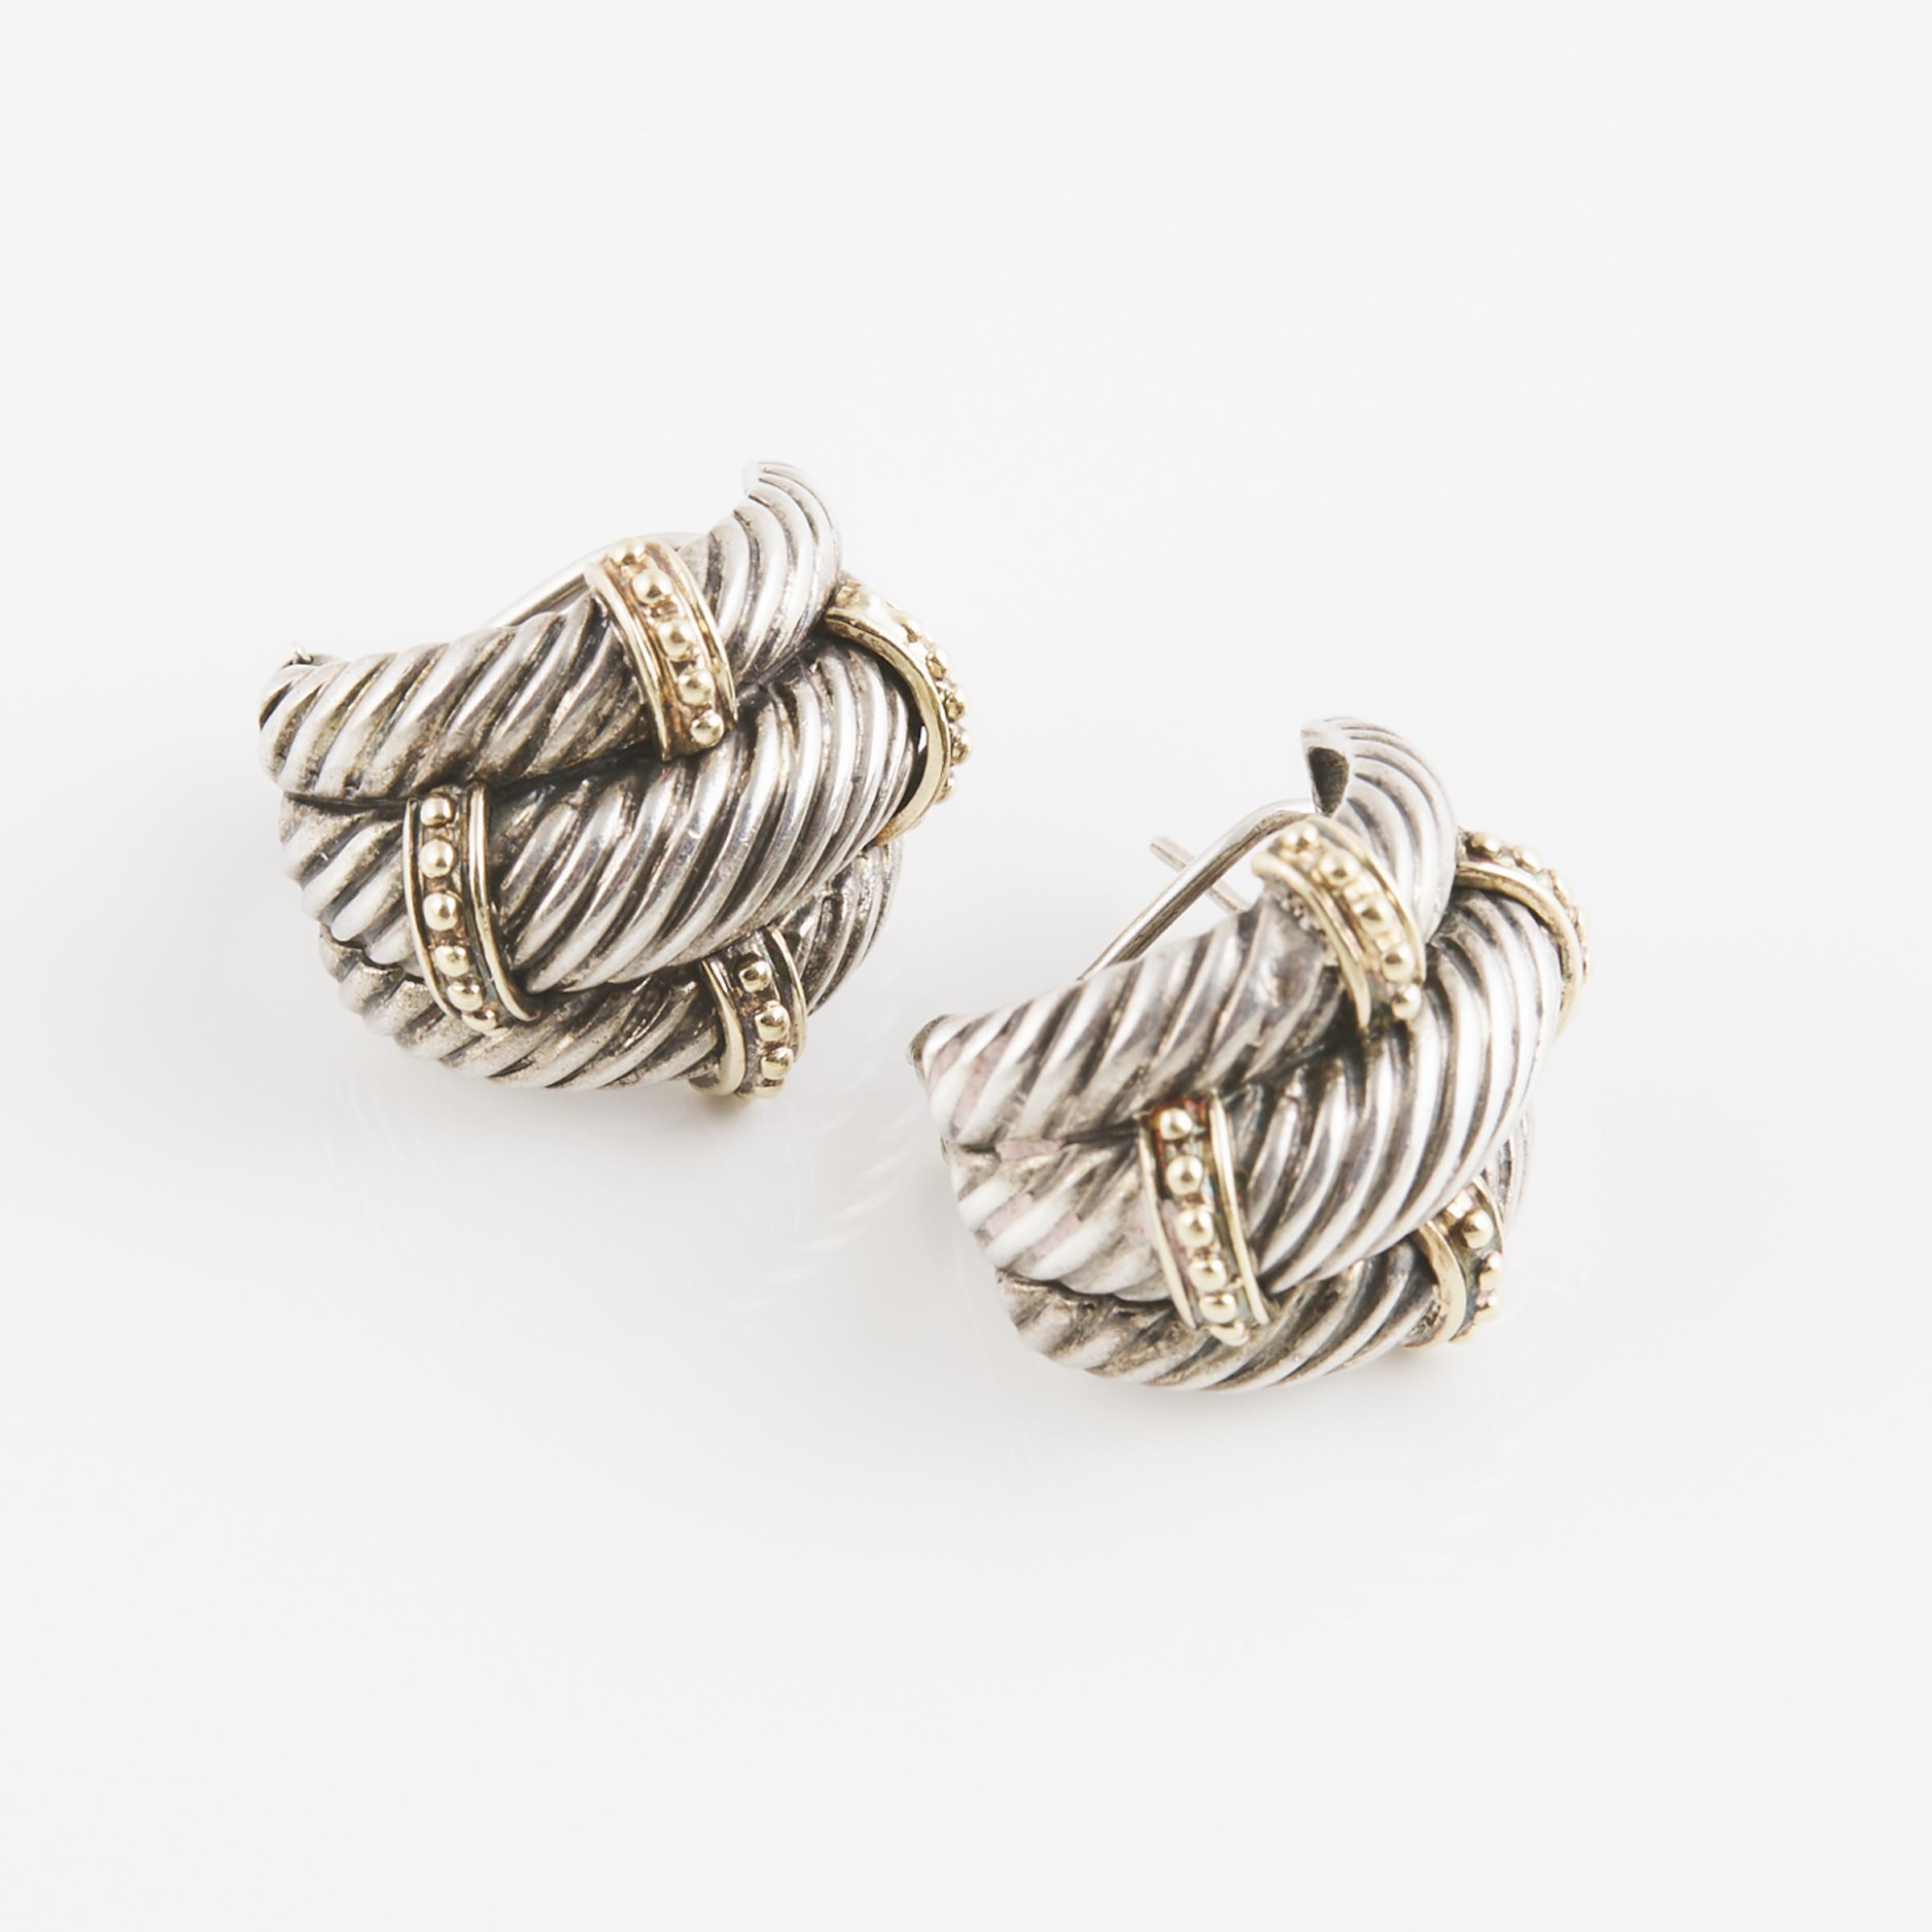 Pair Of John Hardy Sterling Silver And 14k Yellow Gold Earrings